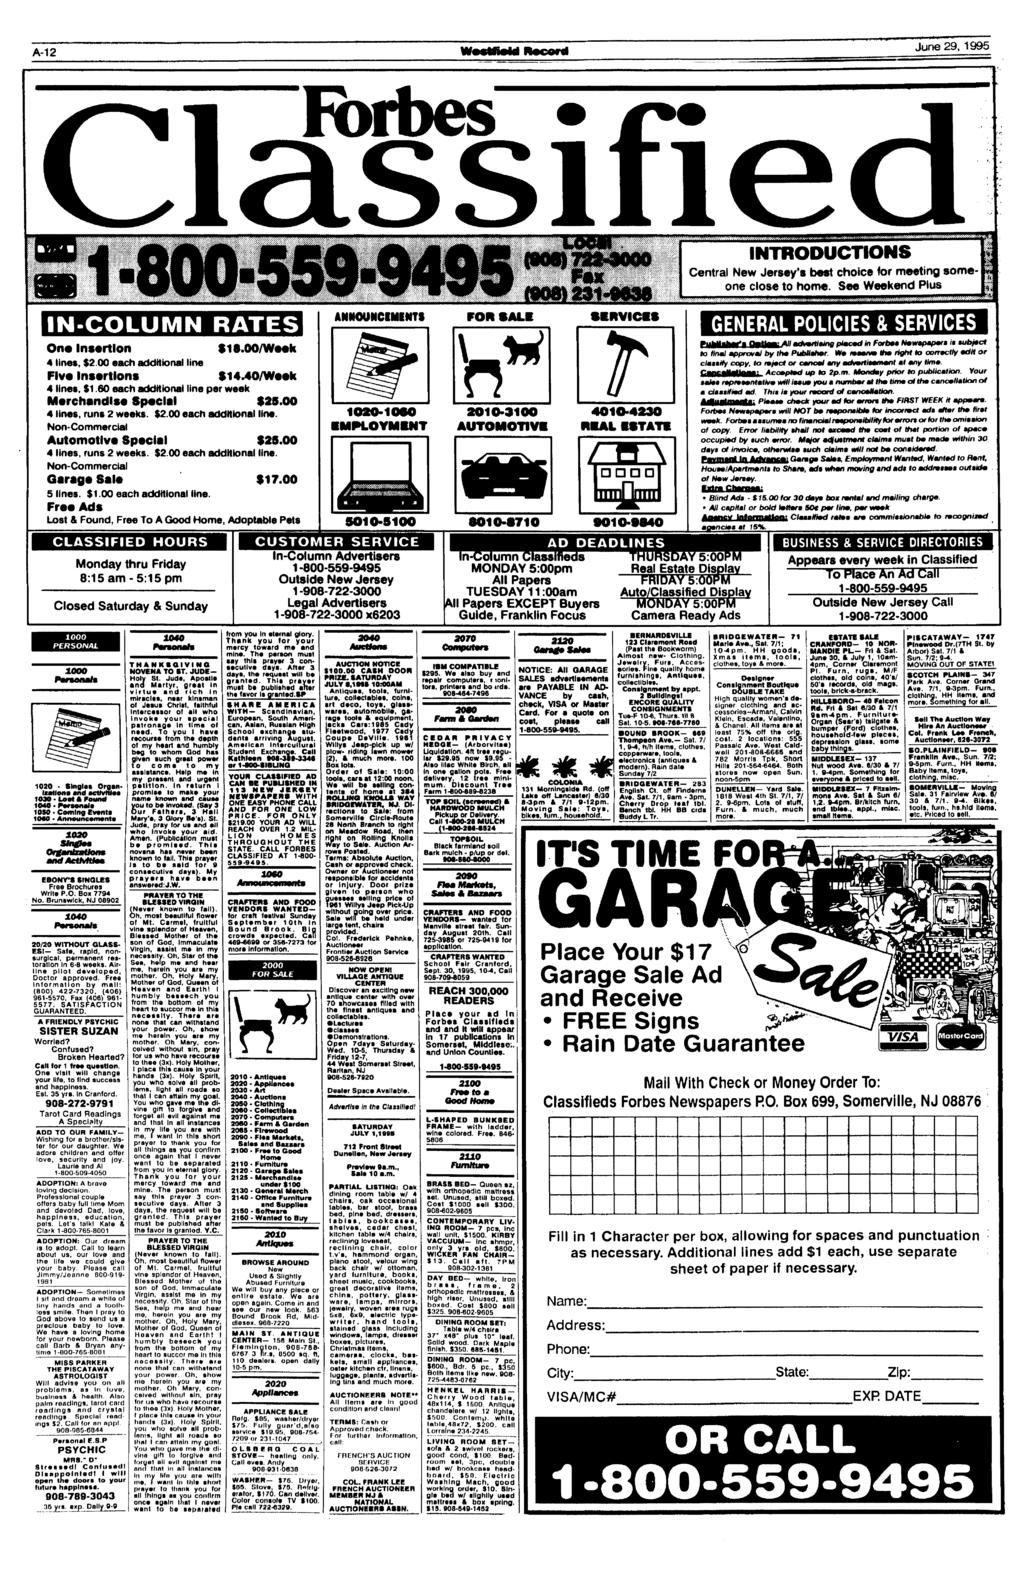 A-12 June 29, 1995 lassifi Forbes NTRODUCTONS Central New Jersey's best choice for meeting someone close to home. See Weekend Pius N-COLUMN RATES On* nsertion 4 lines, $2.00 each additional line $1«.